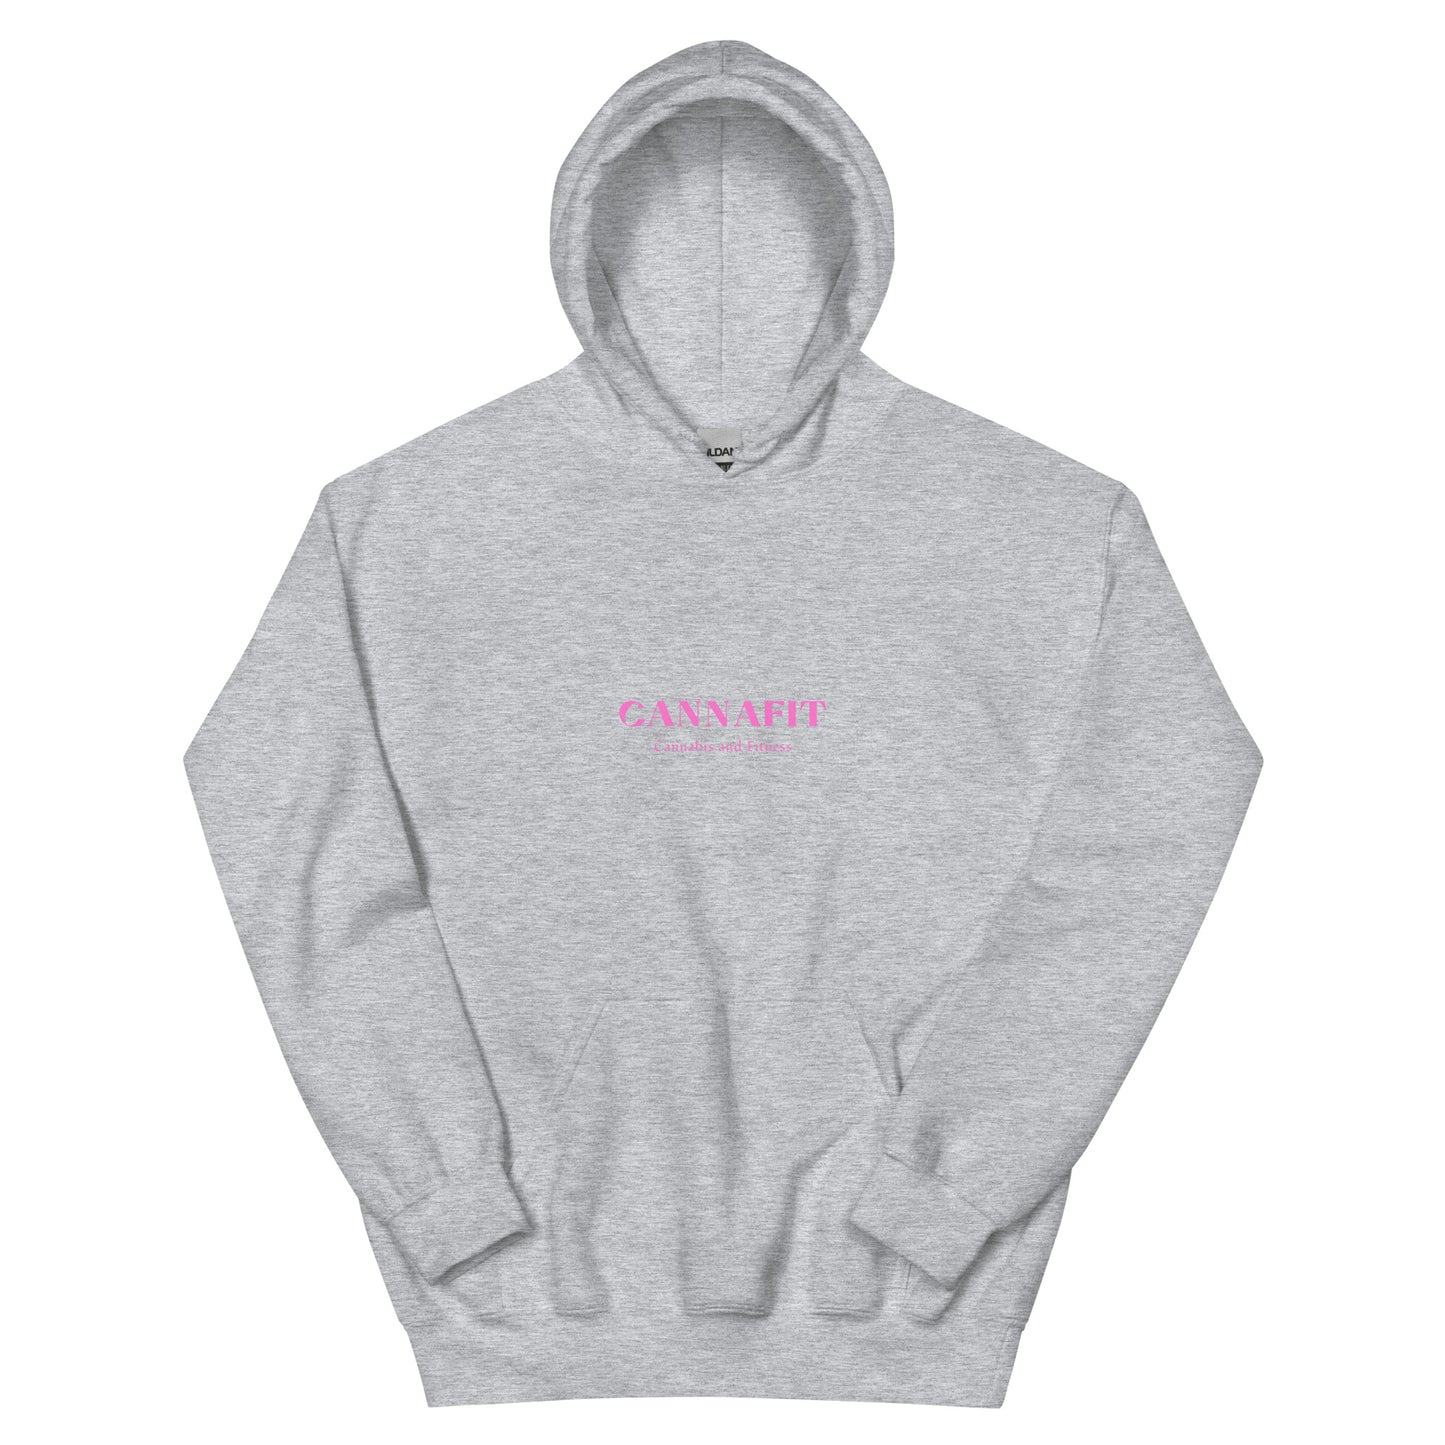 Pink  Cannafit Cannabis And Fitness Unisex Hoodie